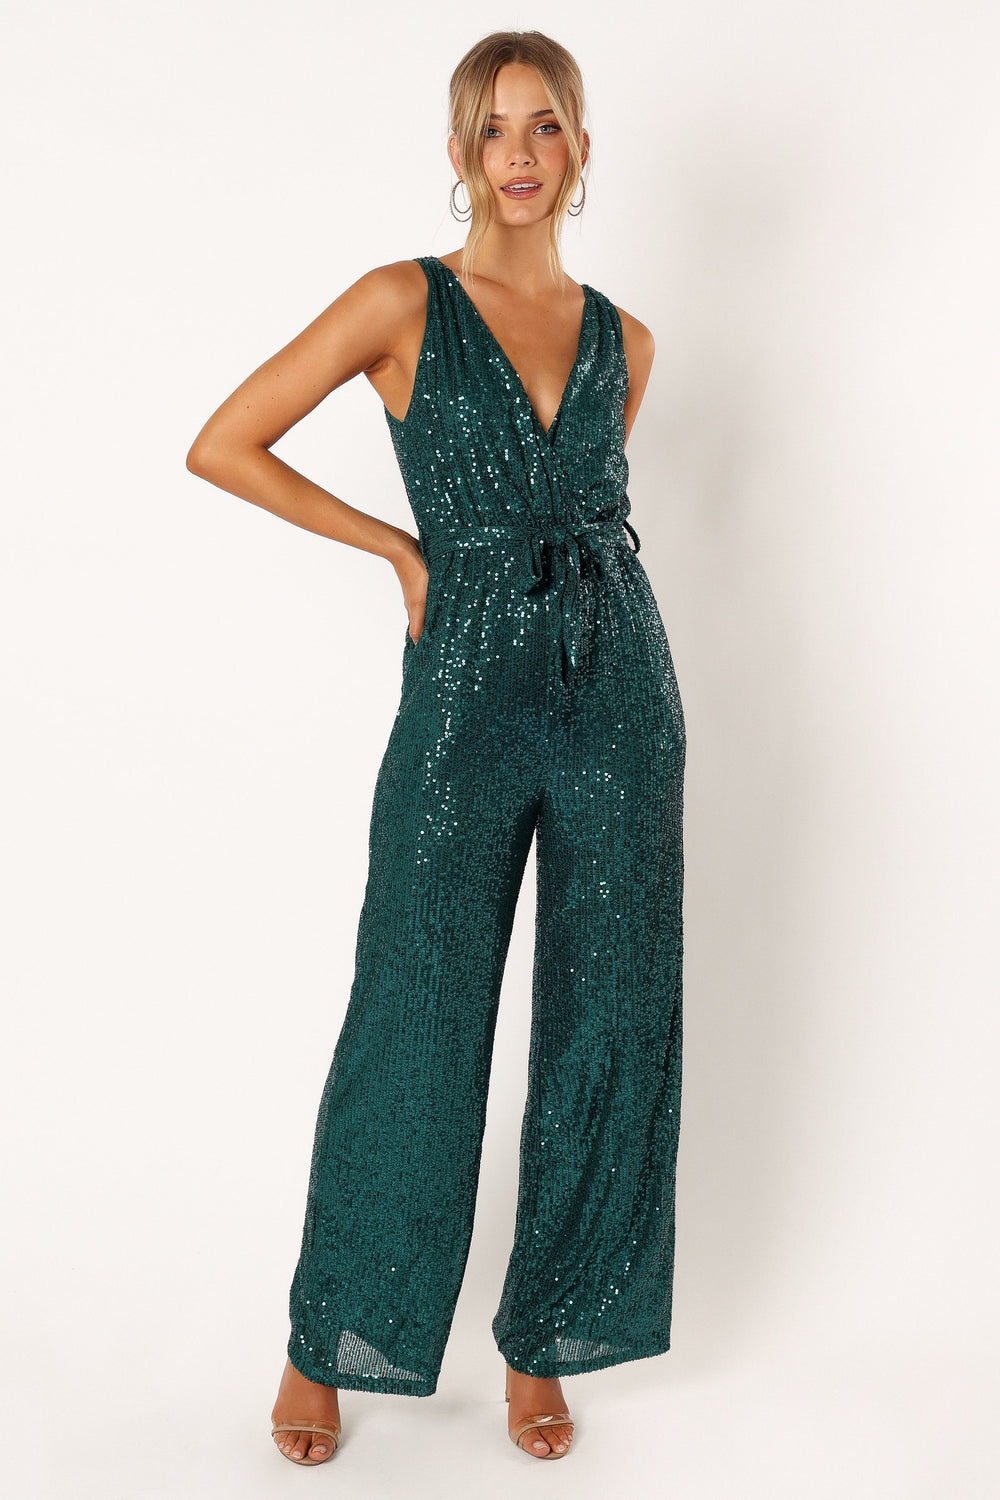 Petal and Pup USA Rompers Katherine Sequin Jumpsuit - Emerald